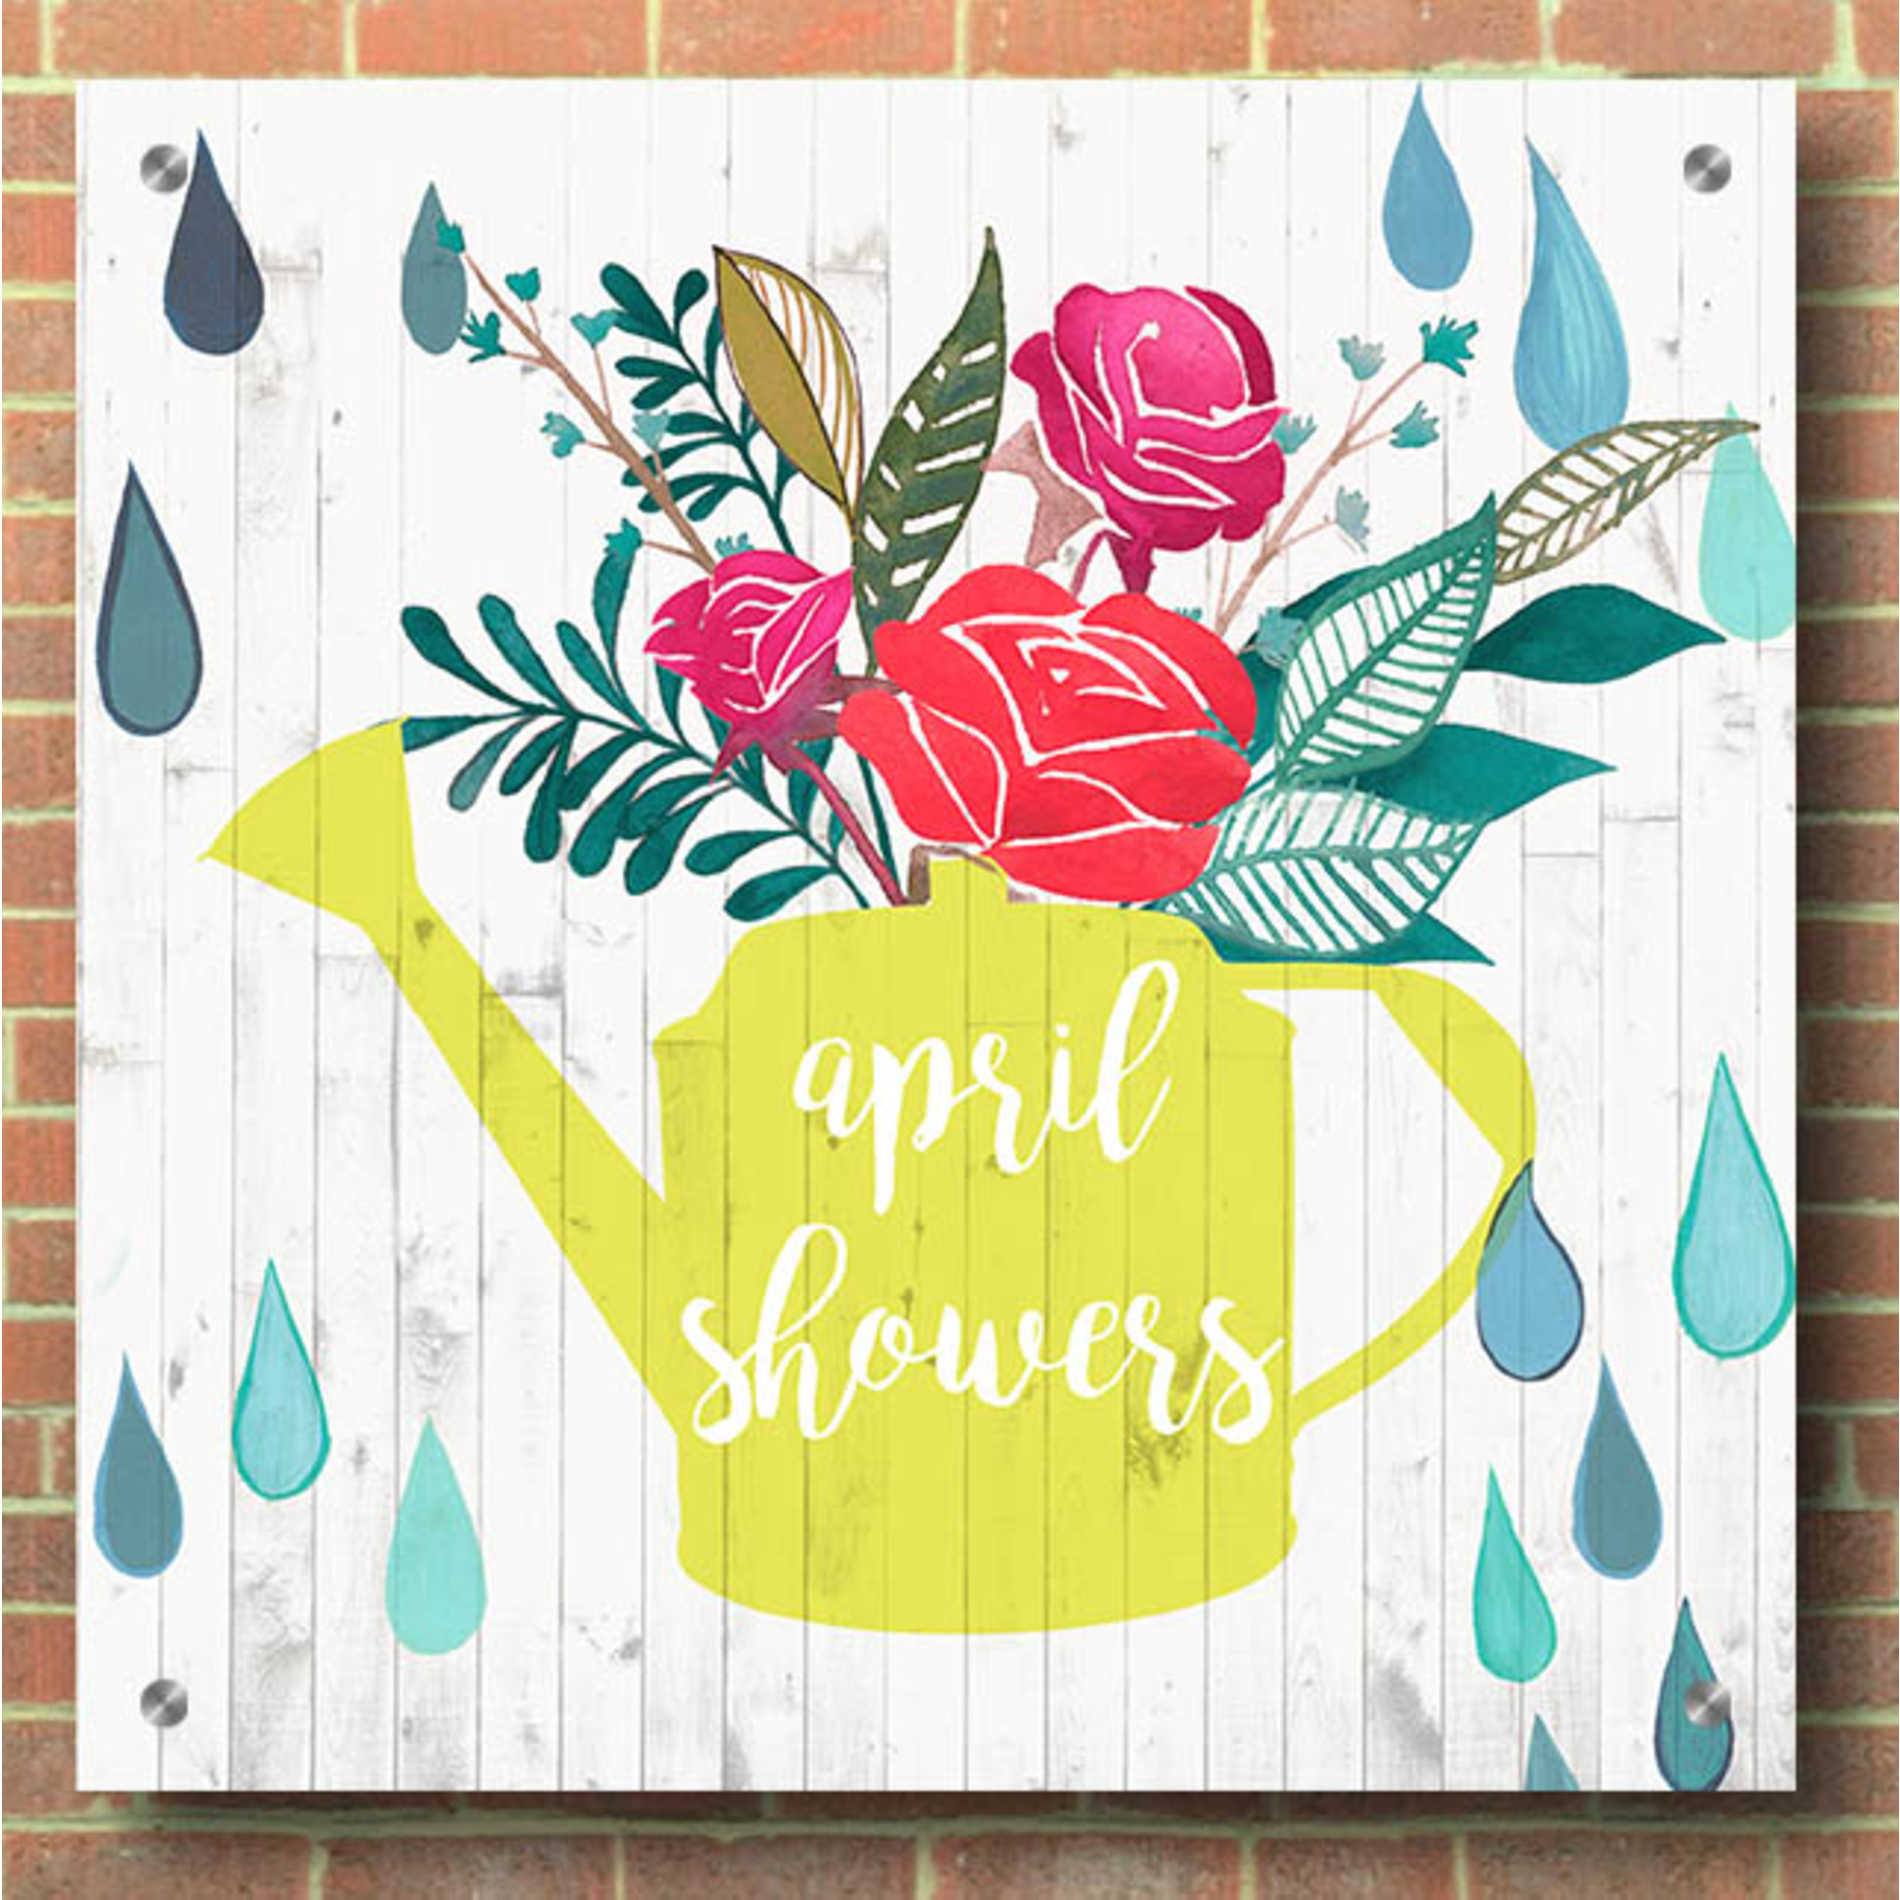 Epic Art 'April Showers and May Flowers I' by Studio W, Acrylic Glass Wall Art,36x36